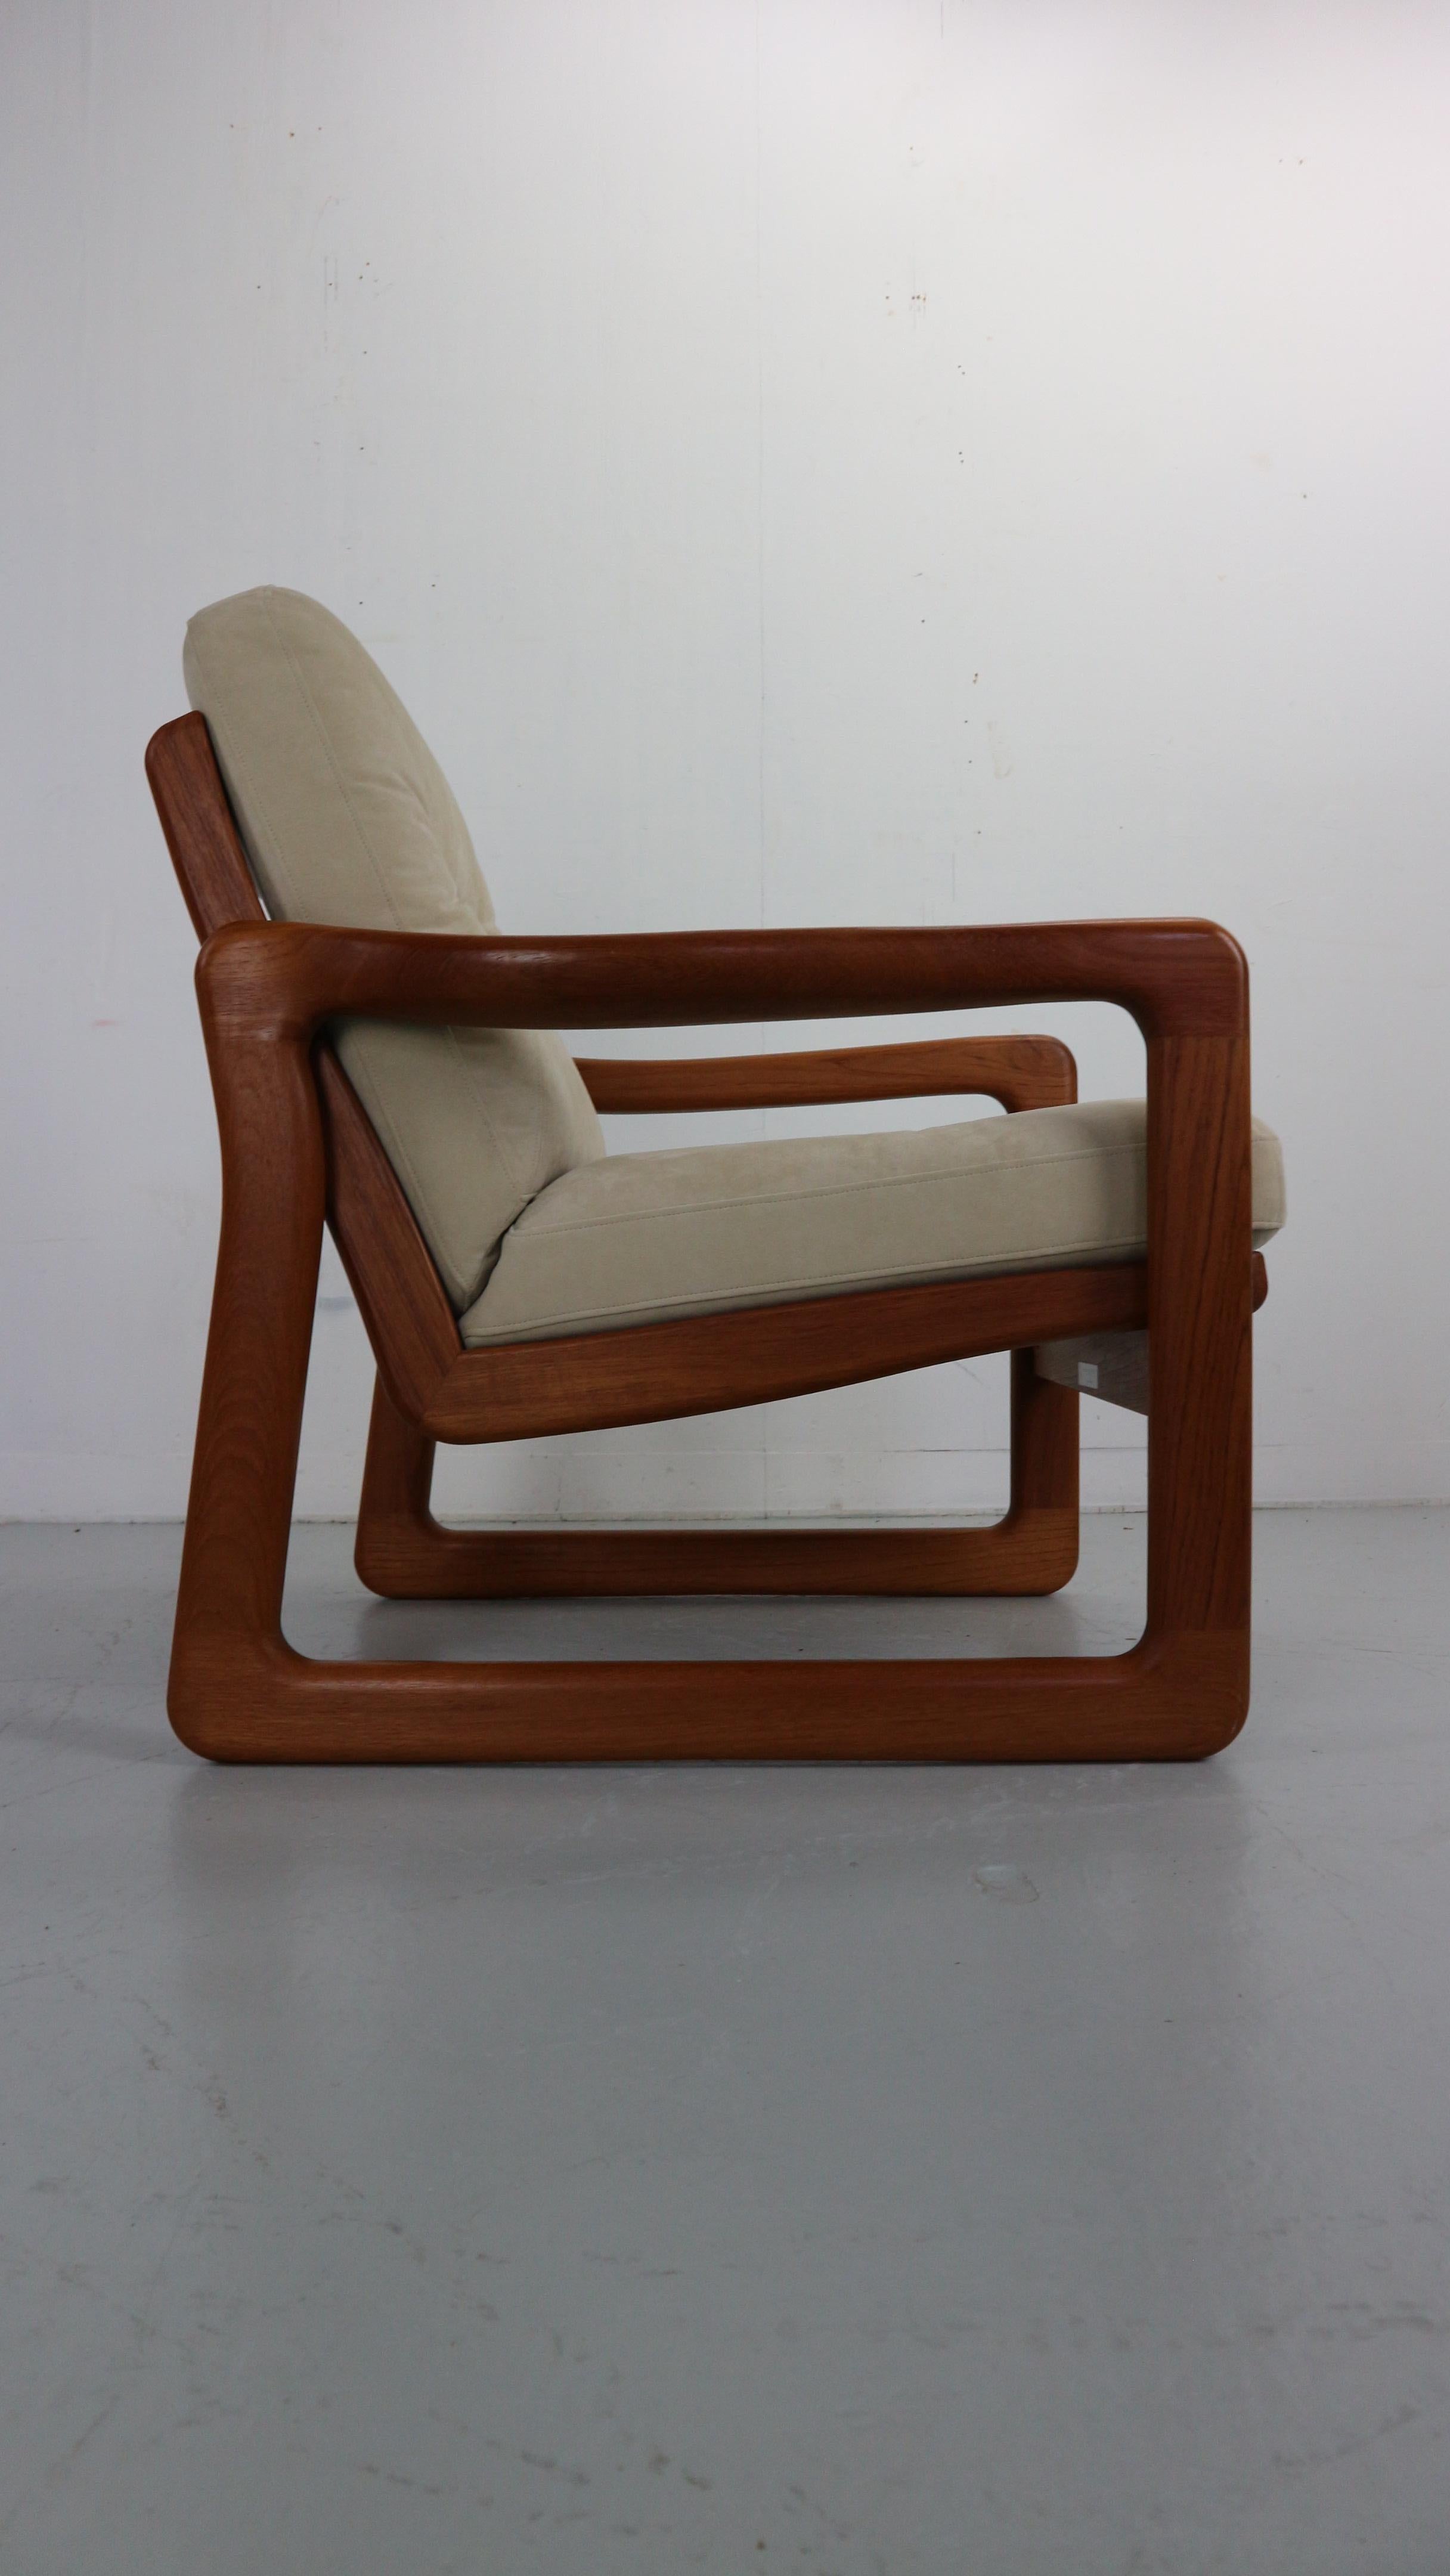 Vintage armchair Poul Jeppensen, Holstebro Möbelfabrik in creme / natural alcantara

Very beautiful and comfortable armchair by Poul Jeppensen for Holstebro Möbelfabrik, Denmark 1970s
The striking sides with their organic shapes really give this